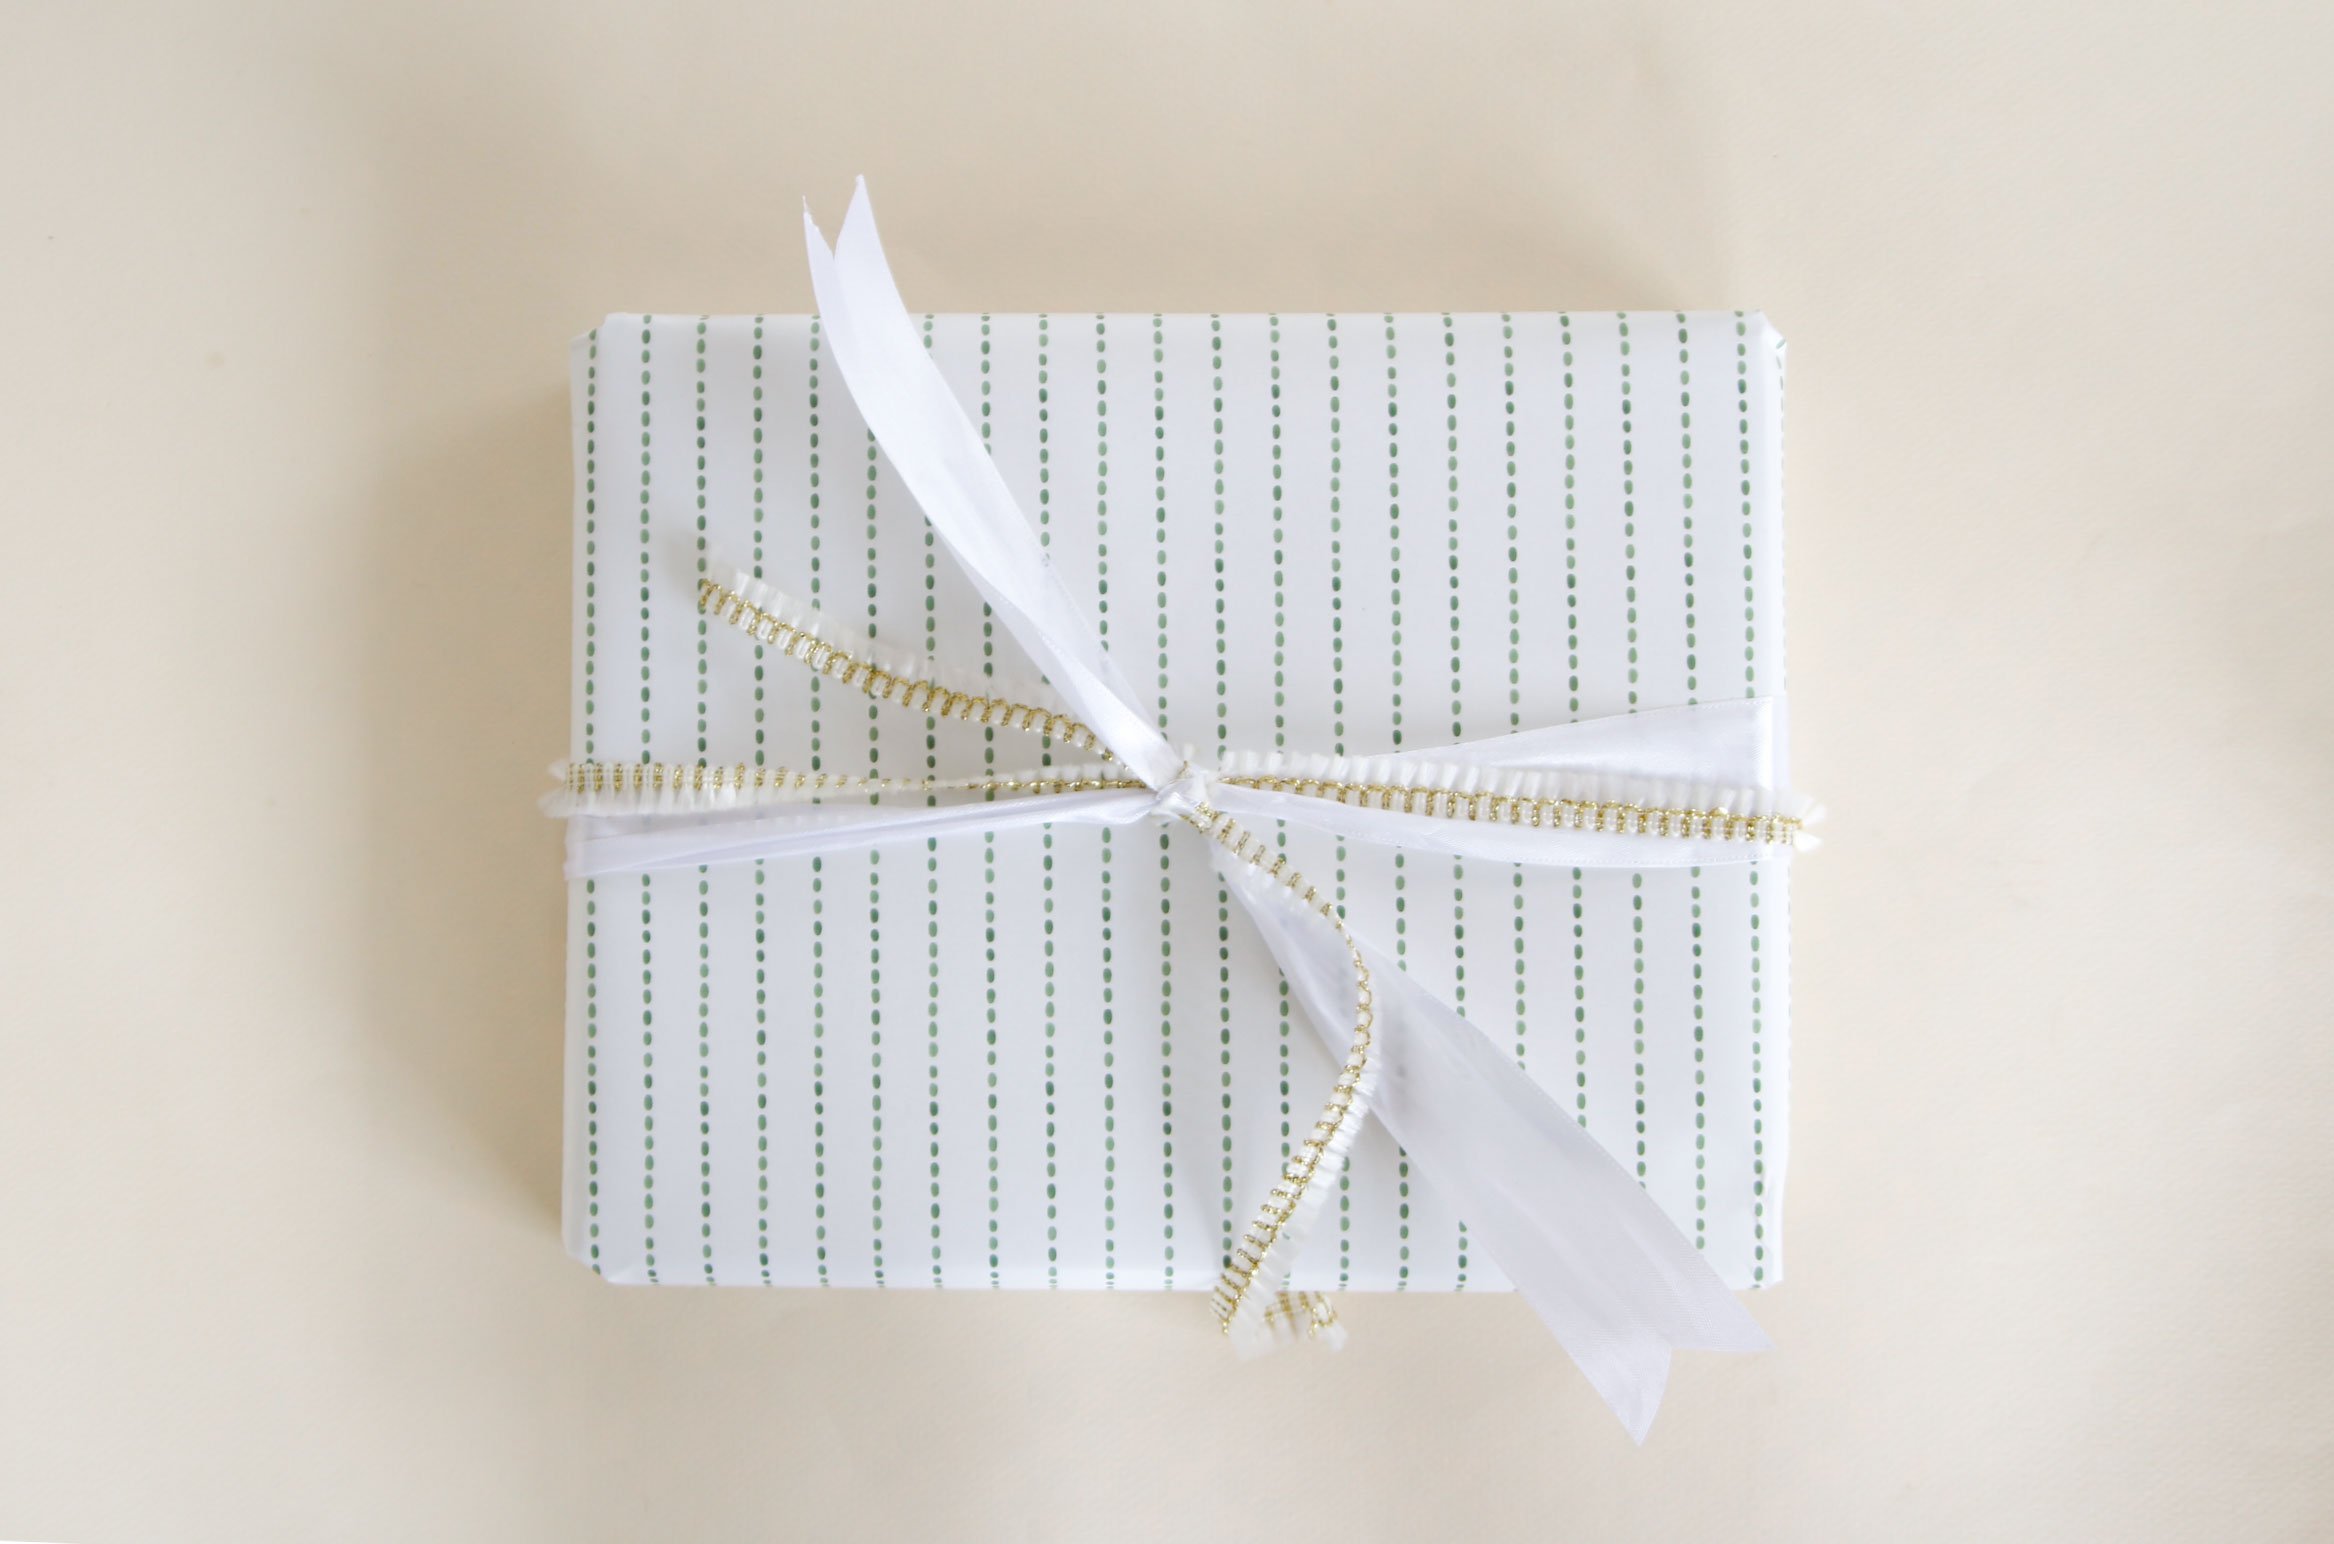 Cream and Dark Green Simple Patterned Christmas Wrapping Paper 